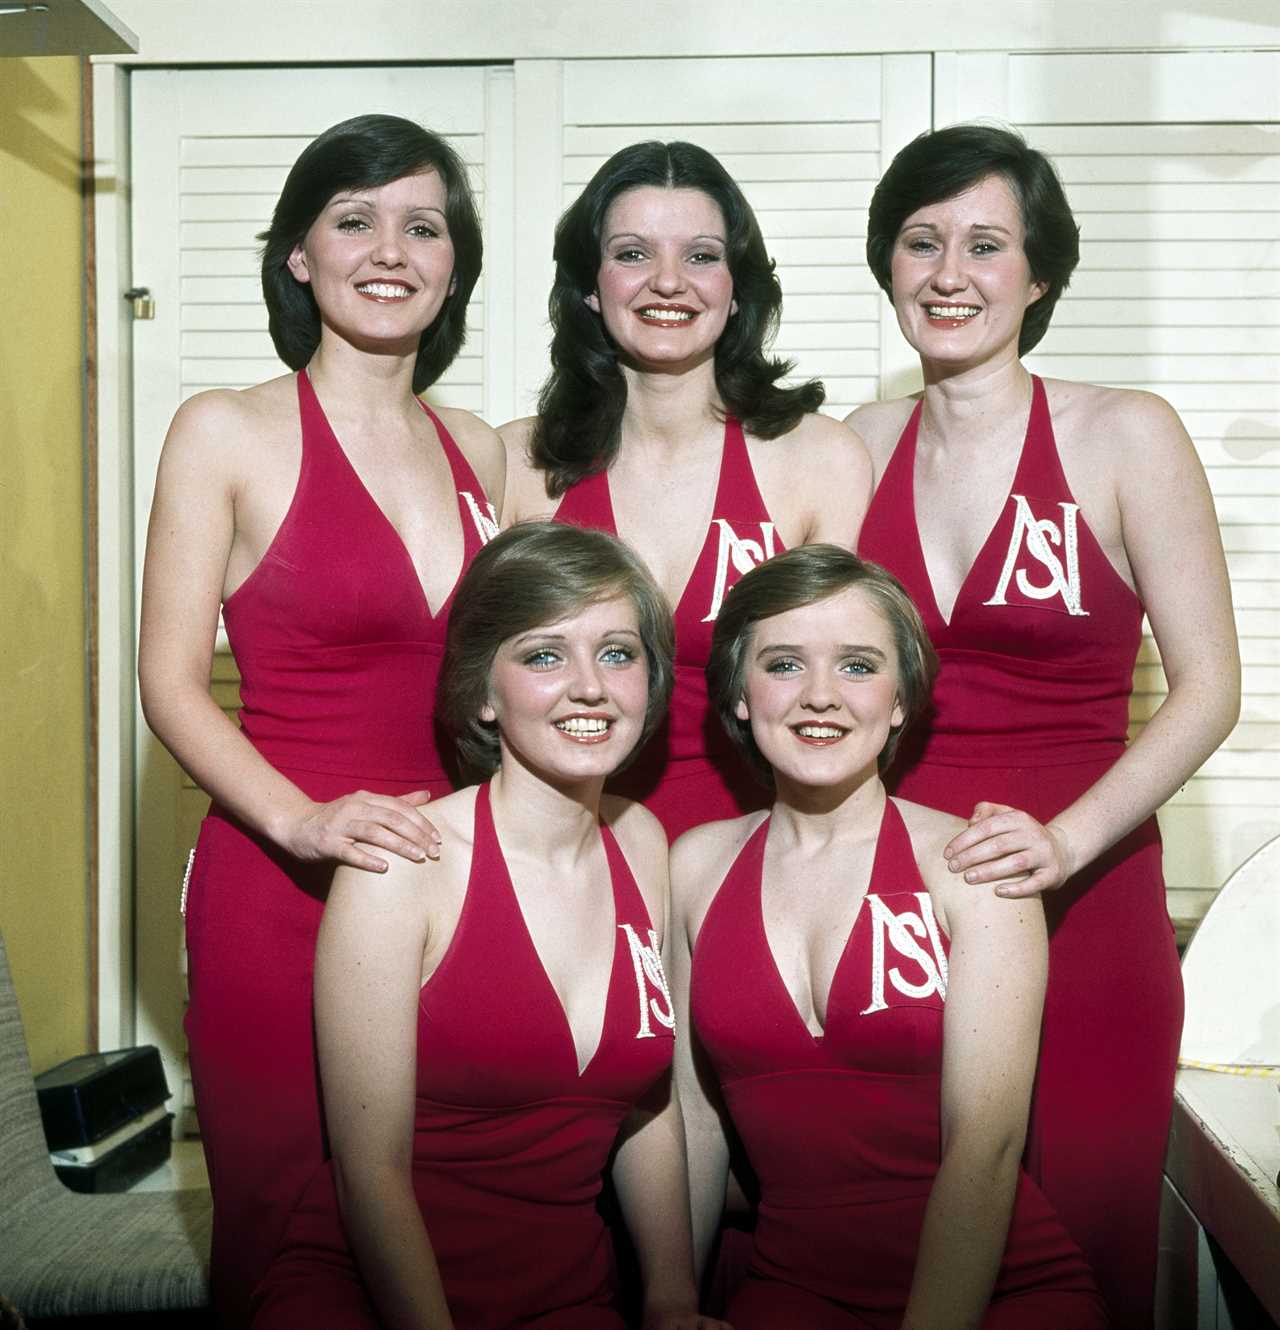 Portrait of the Irish girl group The Nolans, London, England, 1981. Top left to right Maureen, Anne and Bernadette, front left to right Linda and Denise. (Photo by George Wilkes/Hulton Archive/Getty Images)